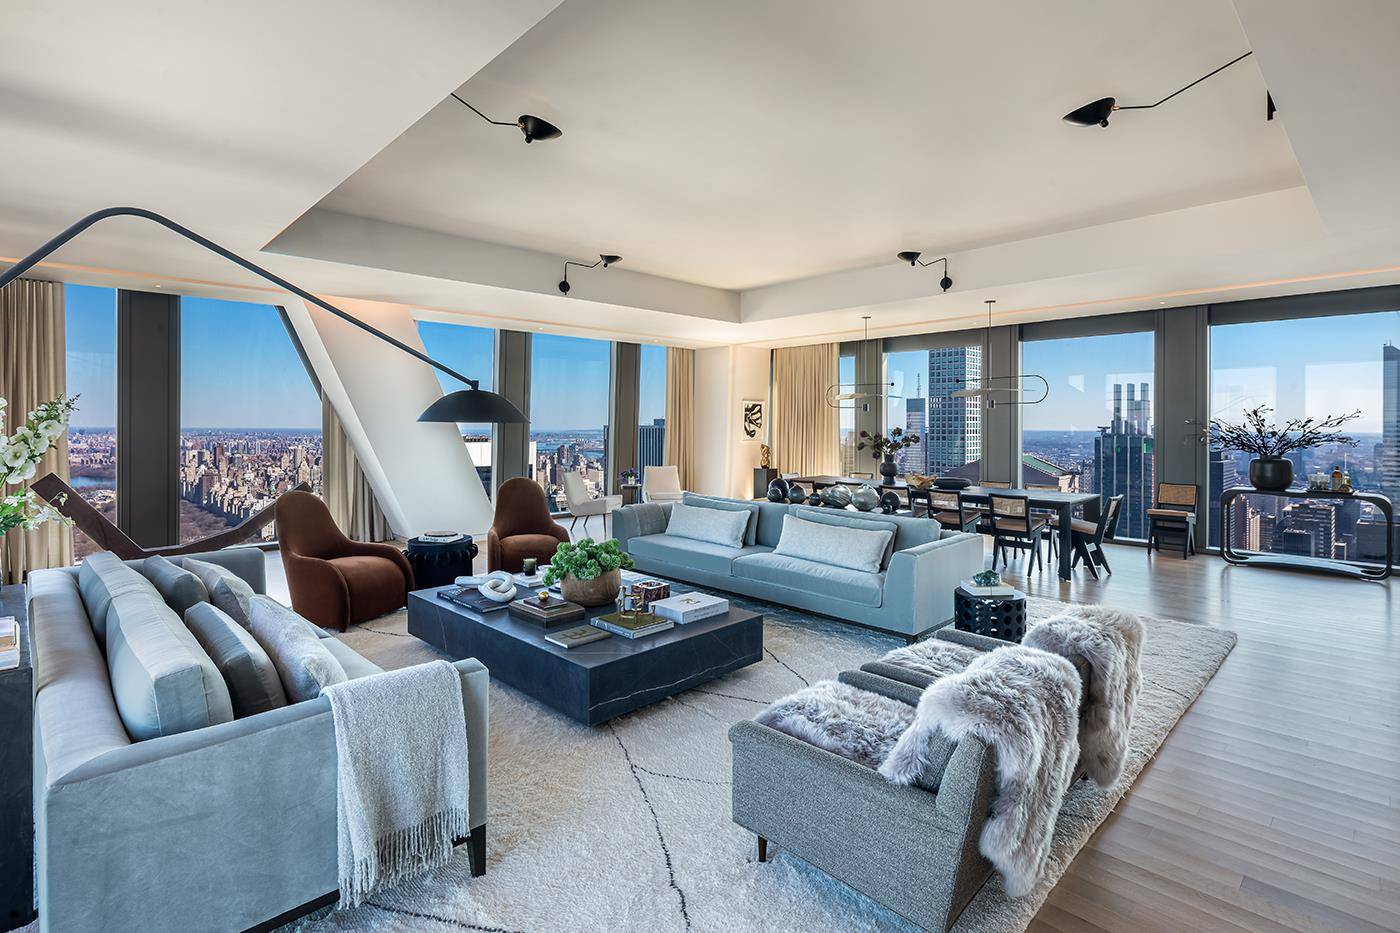 Balancing grand scale living with the intimate feeling of home, Residence 58B at 53 West 53 comprises 3, 251 square feet, offering three bedrooms, three and a half bathrooms, and ...